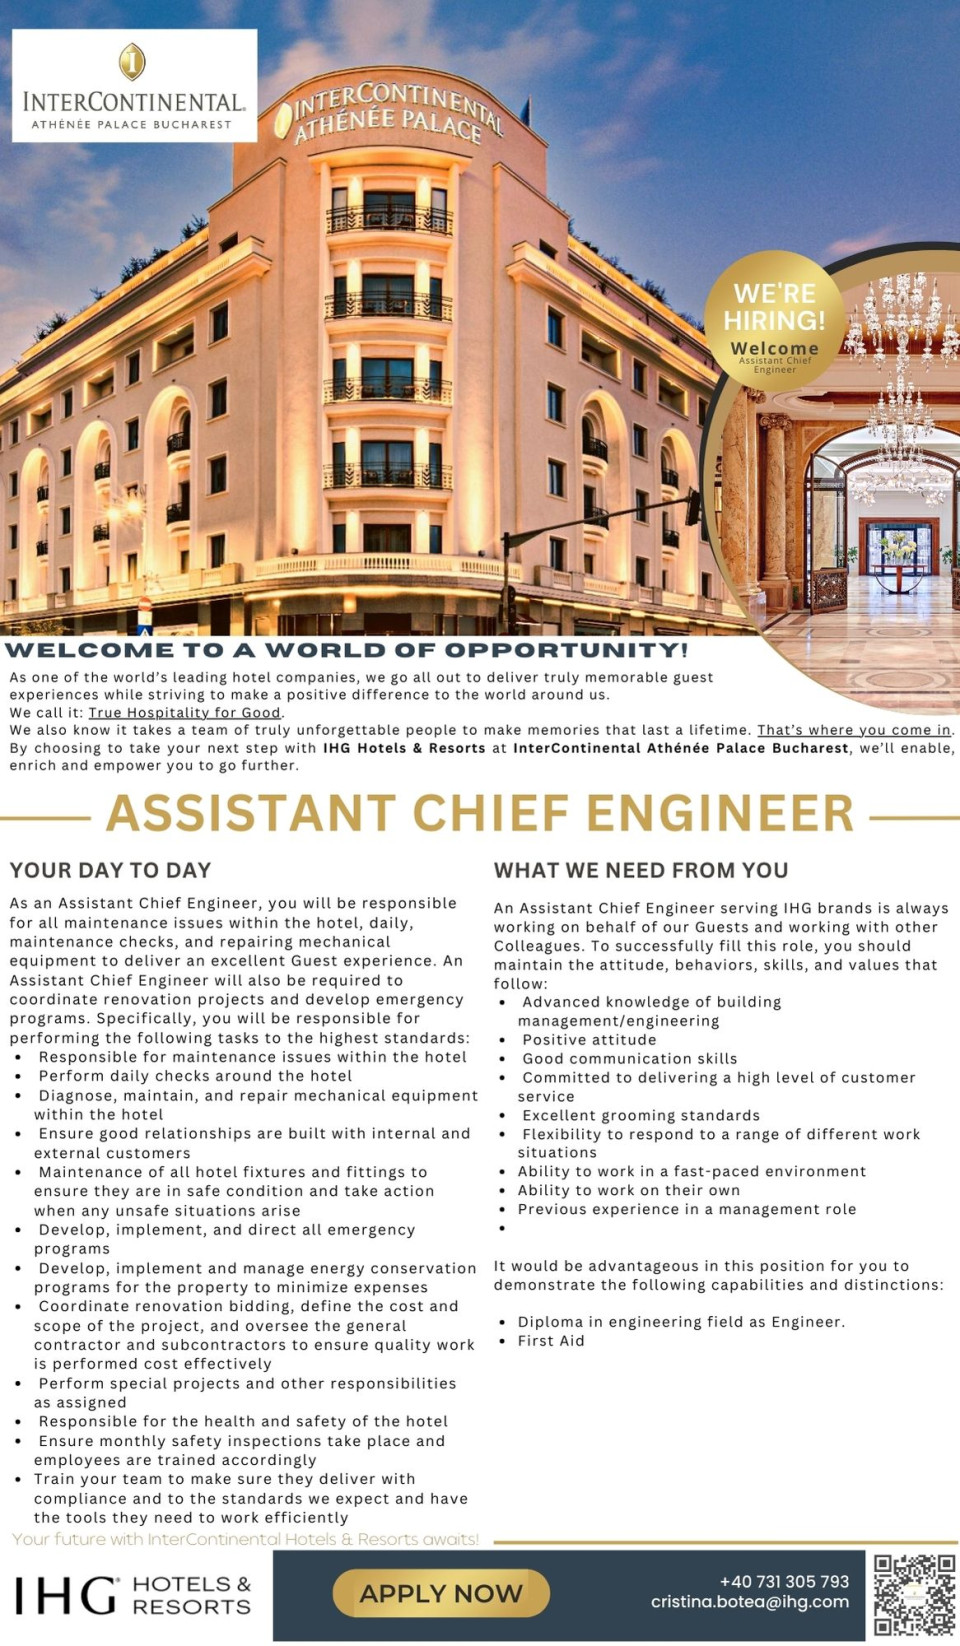 Assistant Chief Engineer